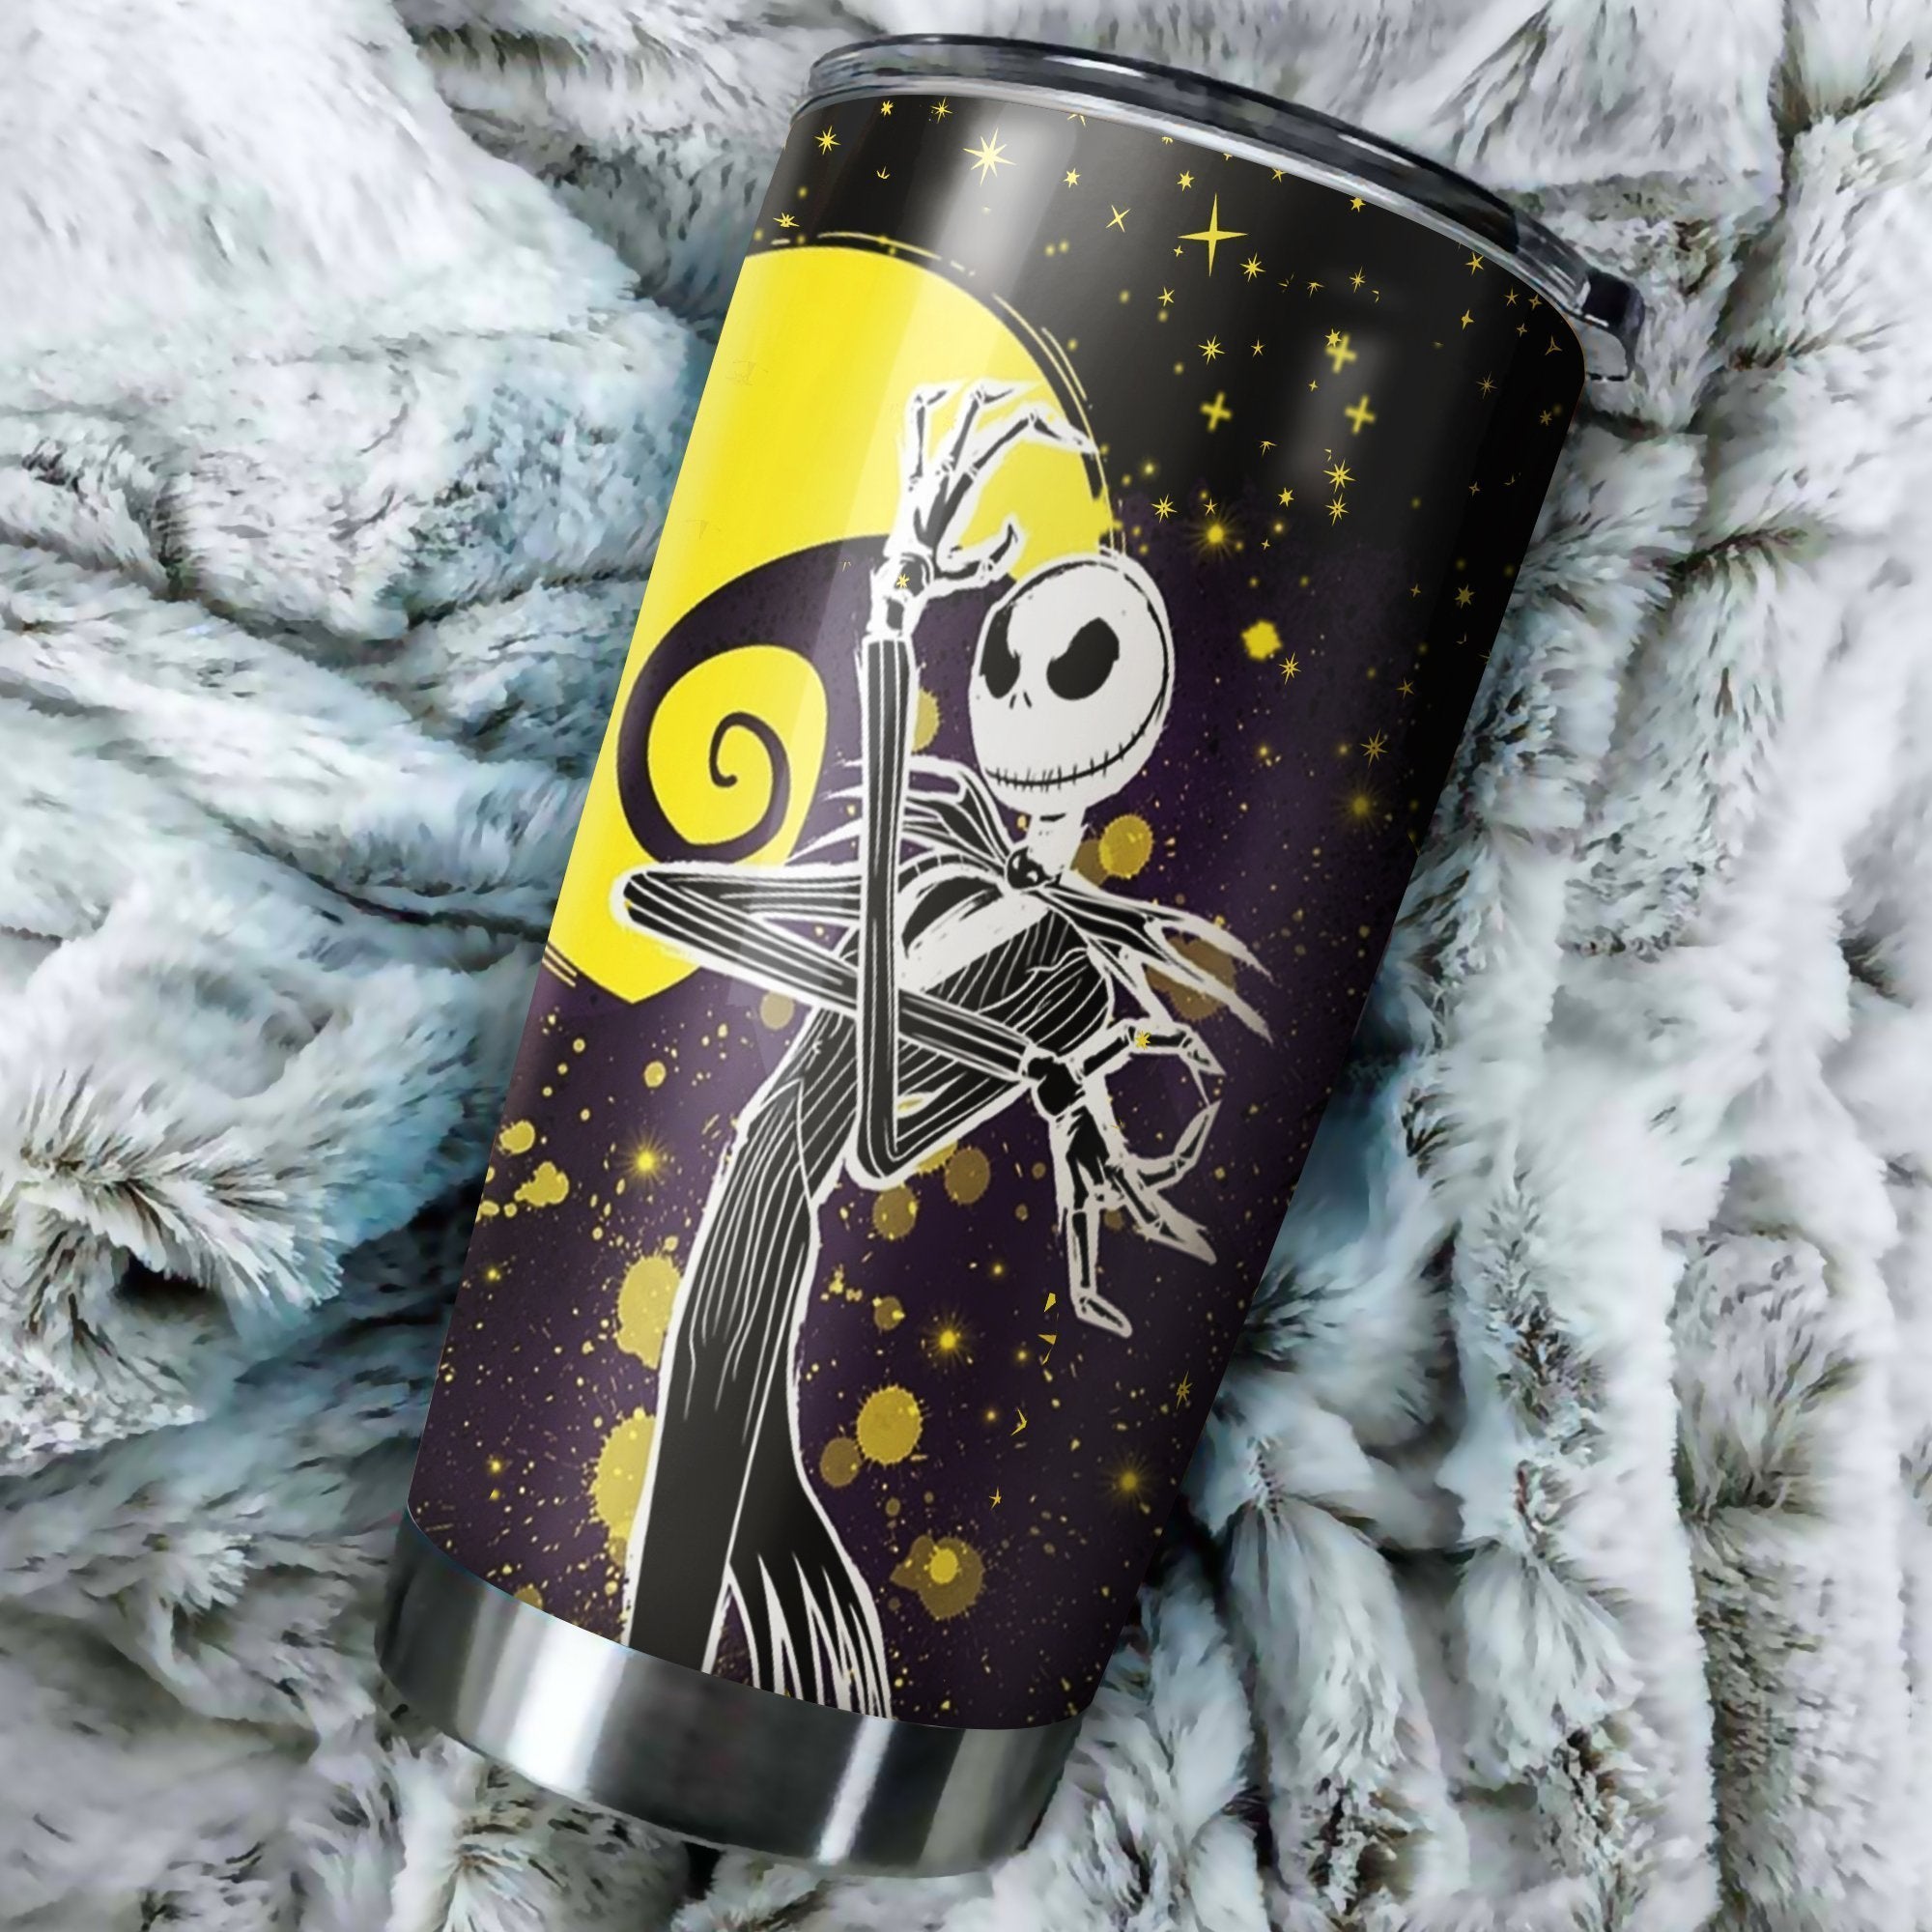 Jack Nightmare Christmas Tumbler Best Perfect Gift Idea Stainless Traveling Mugs 2021